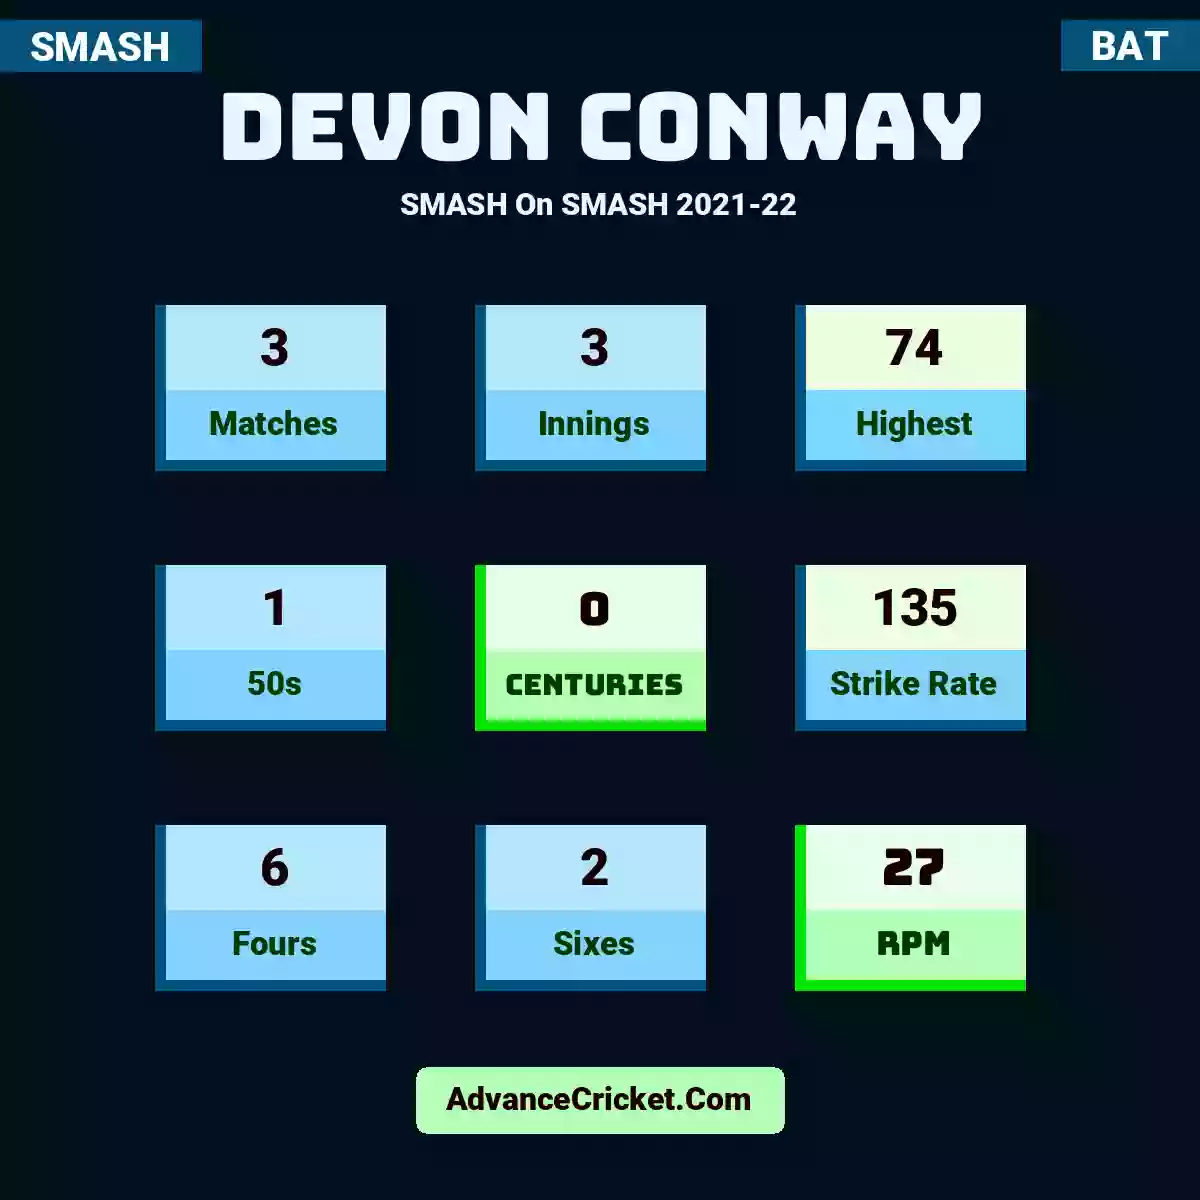 Devon Conway SMASH  On SMASH 2021-22, Devon Conway played 3 matches, scored 74 runs as highest, 1 half-centuries, and 0 centuries, with a strike rate of 135. D.Conway hit 6 fours and 2 sixes, with an RPM of 27.